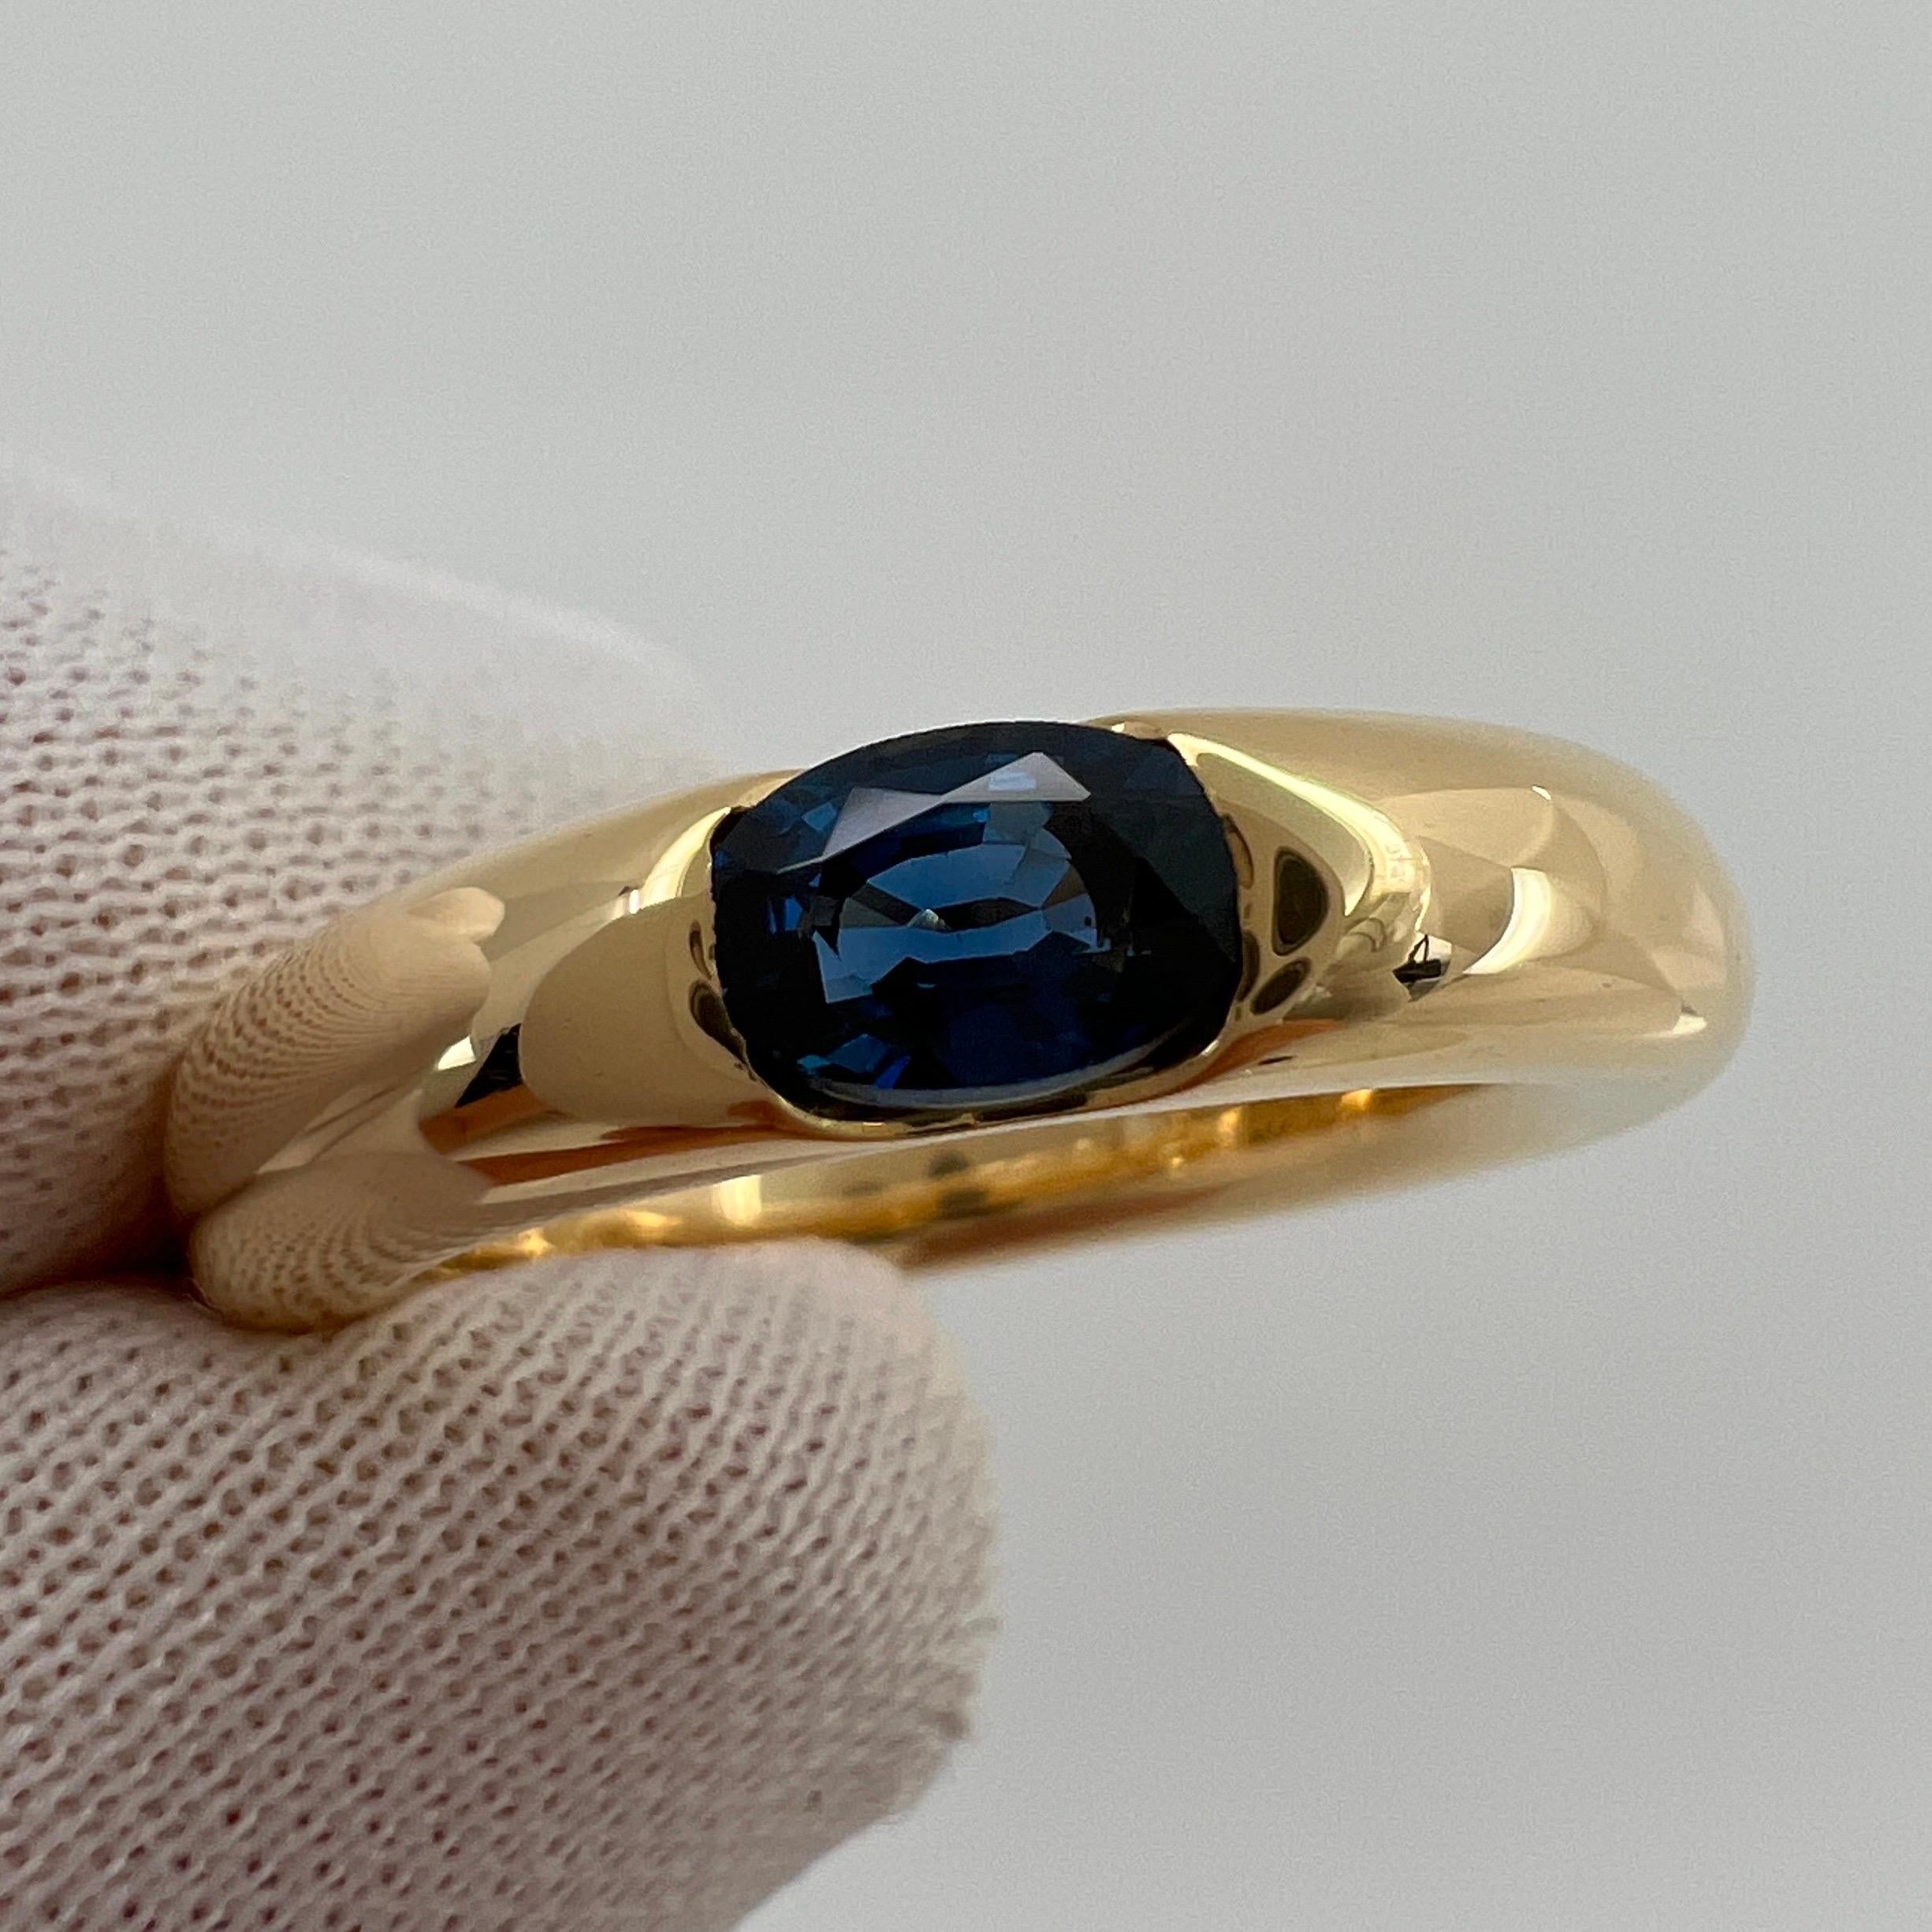 Vintage Cartier Deep Blue Sapphire Oval Ellipse 18k Yellow Gold Solitaire Ring 5 1